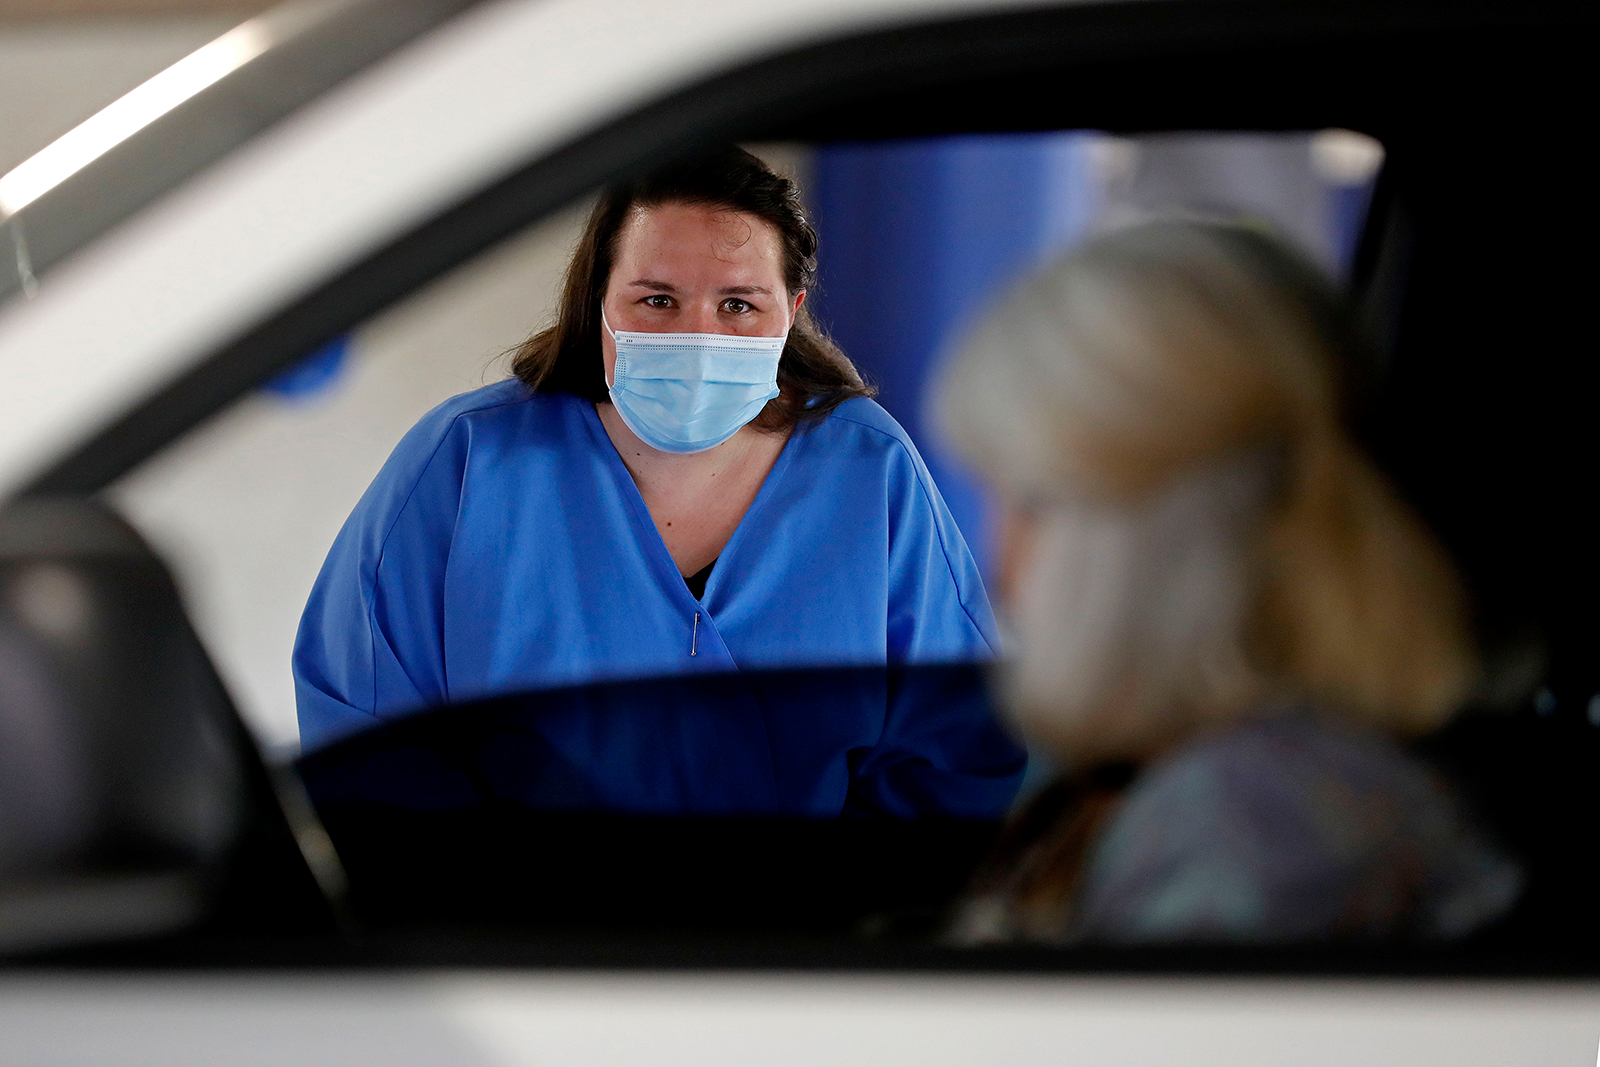 A Dis-Chem Pharmacy health professional speaks to a woman before conducting a coronavirus test at a drive-through testing site at a mall in Centurion, South Africa, on December 16.